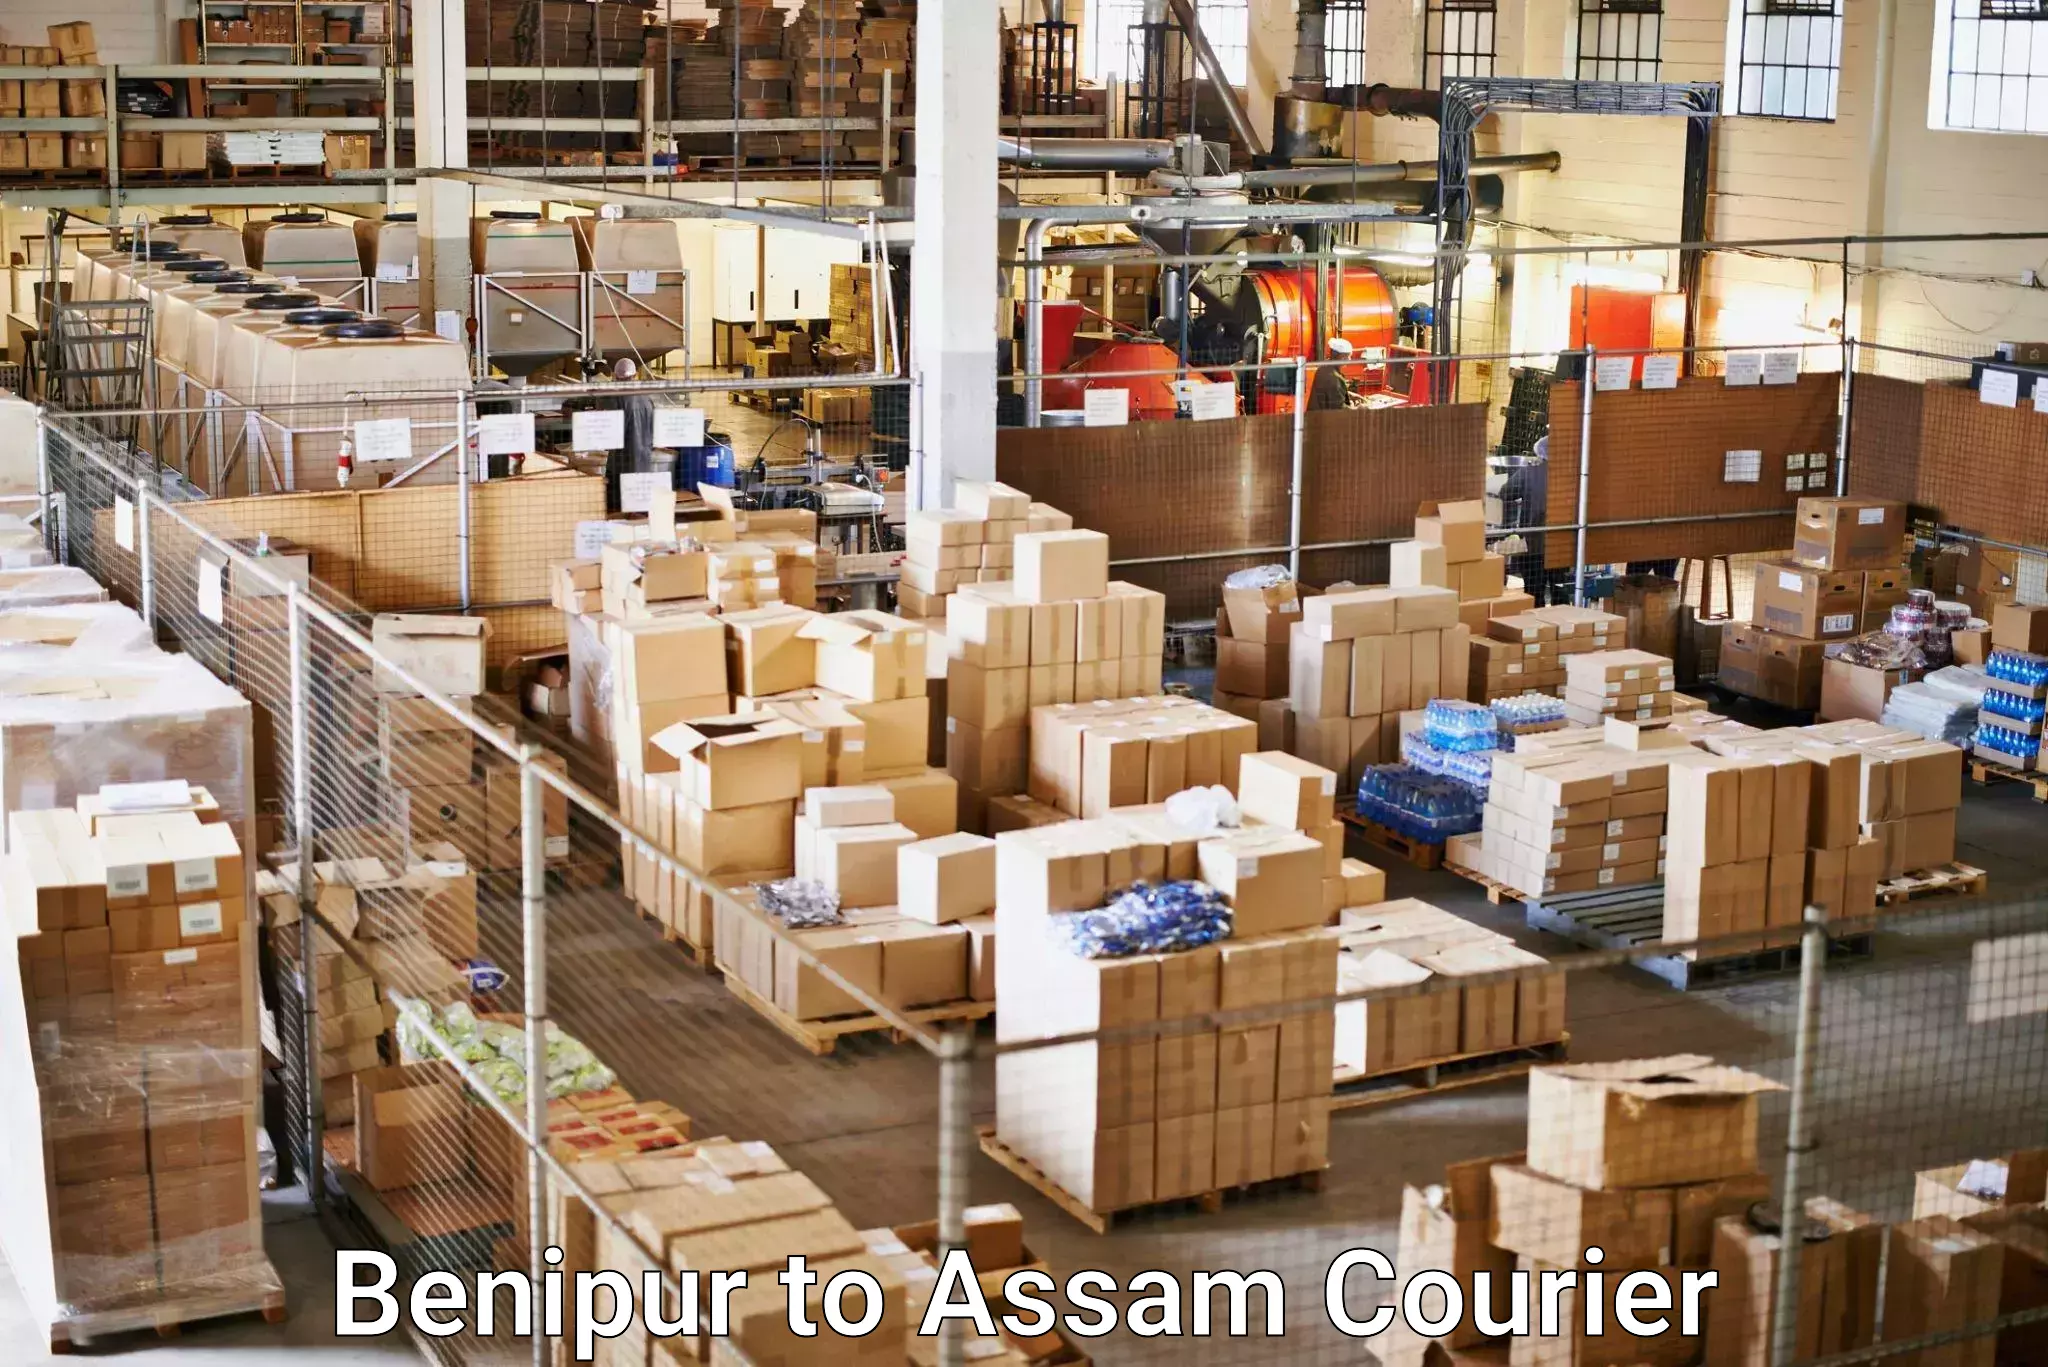 24/7 courier service Benipur to Assam